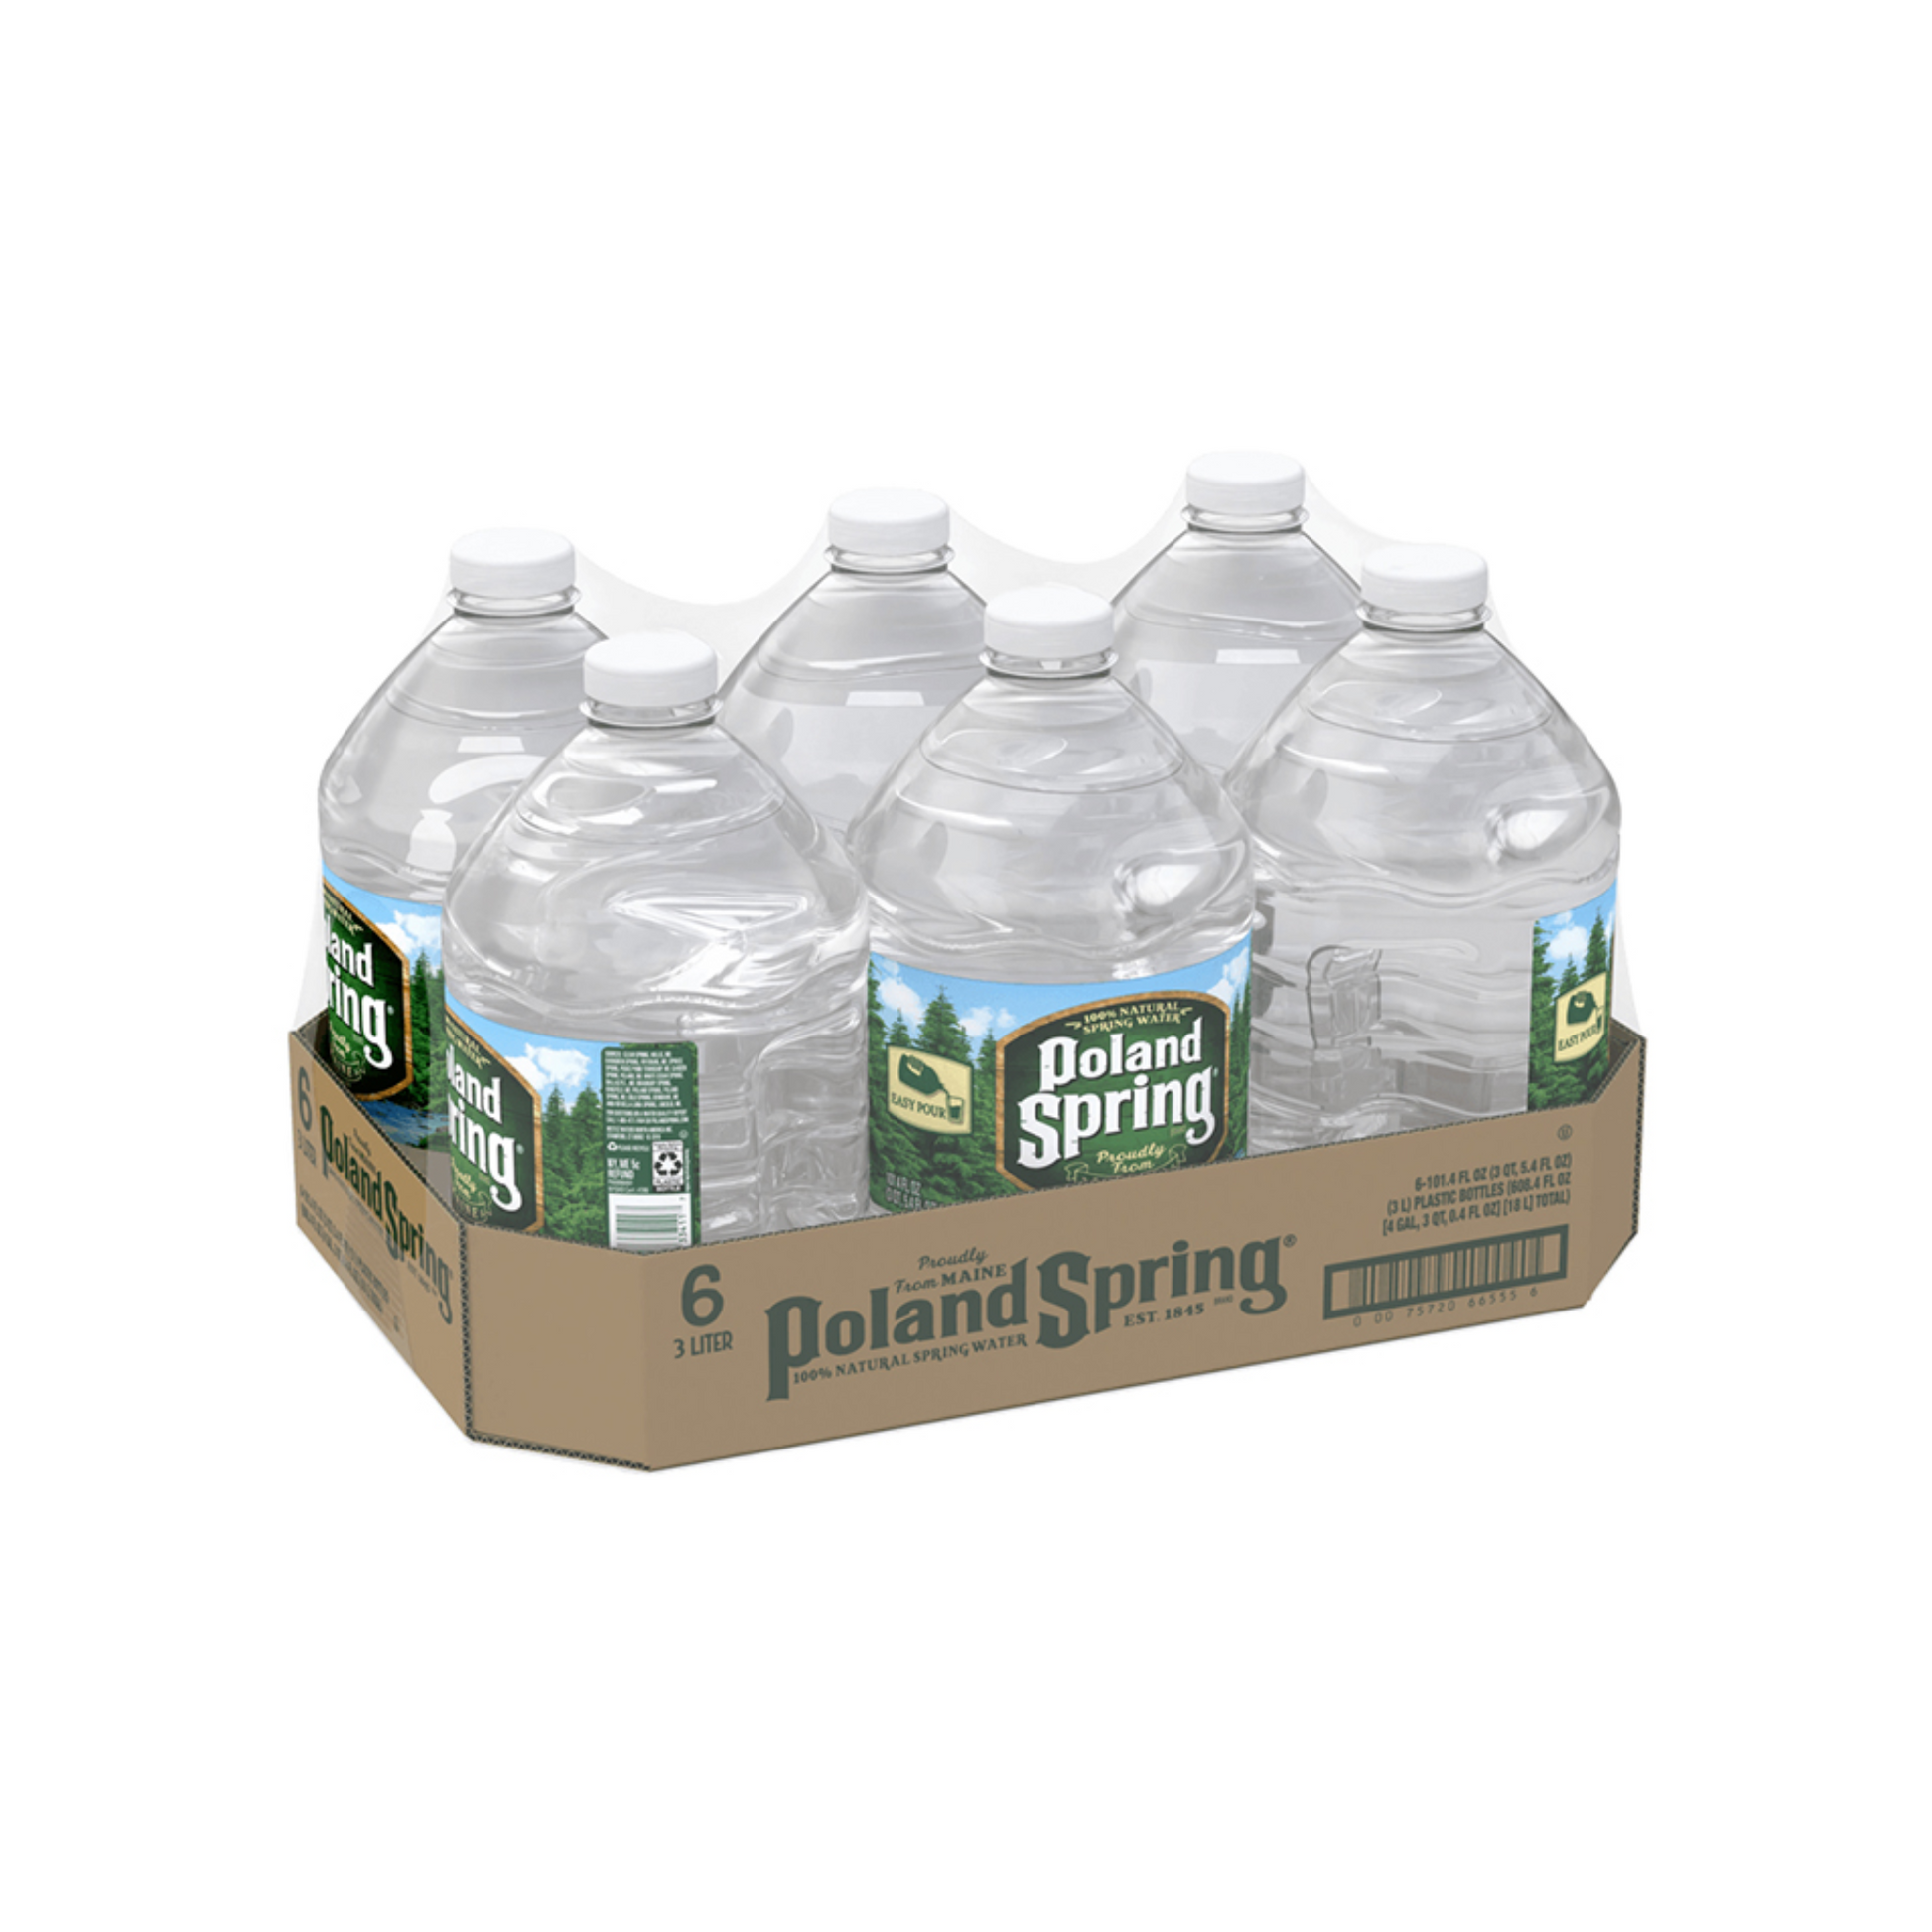 Poland Spring 3L Bottles - 6 Pack, Convenient and Refreshing Hydration Solution